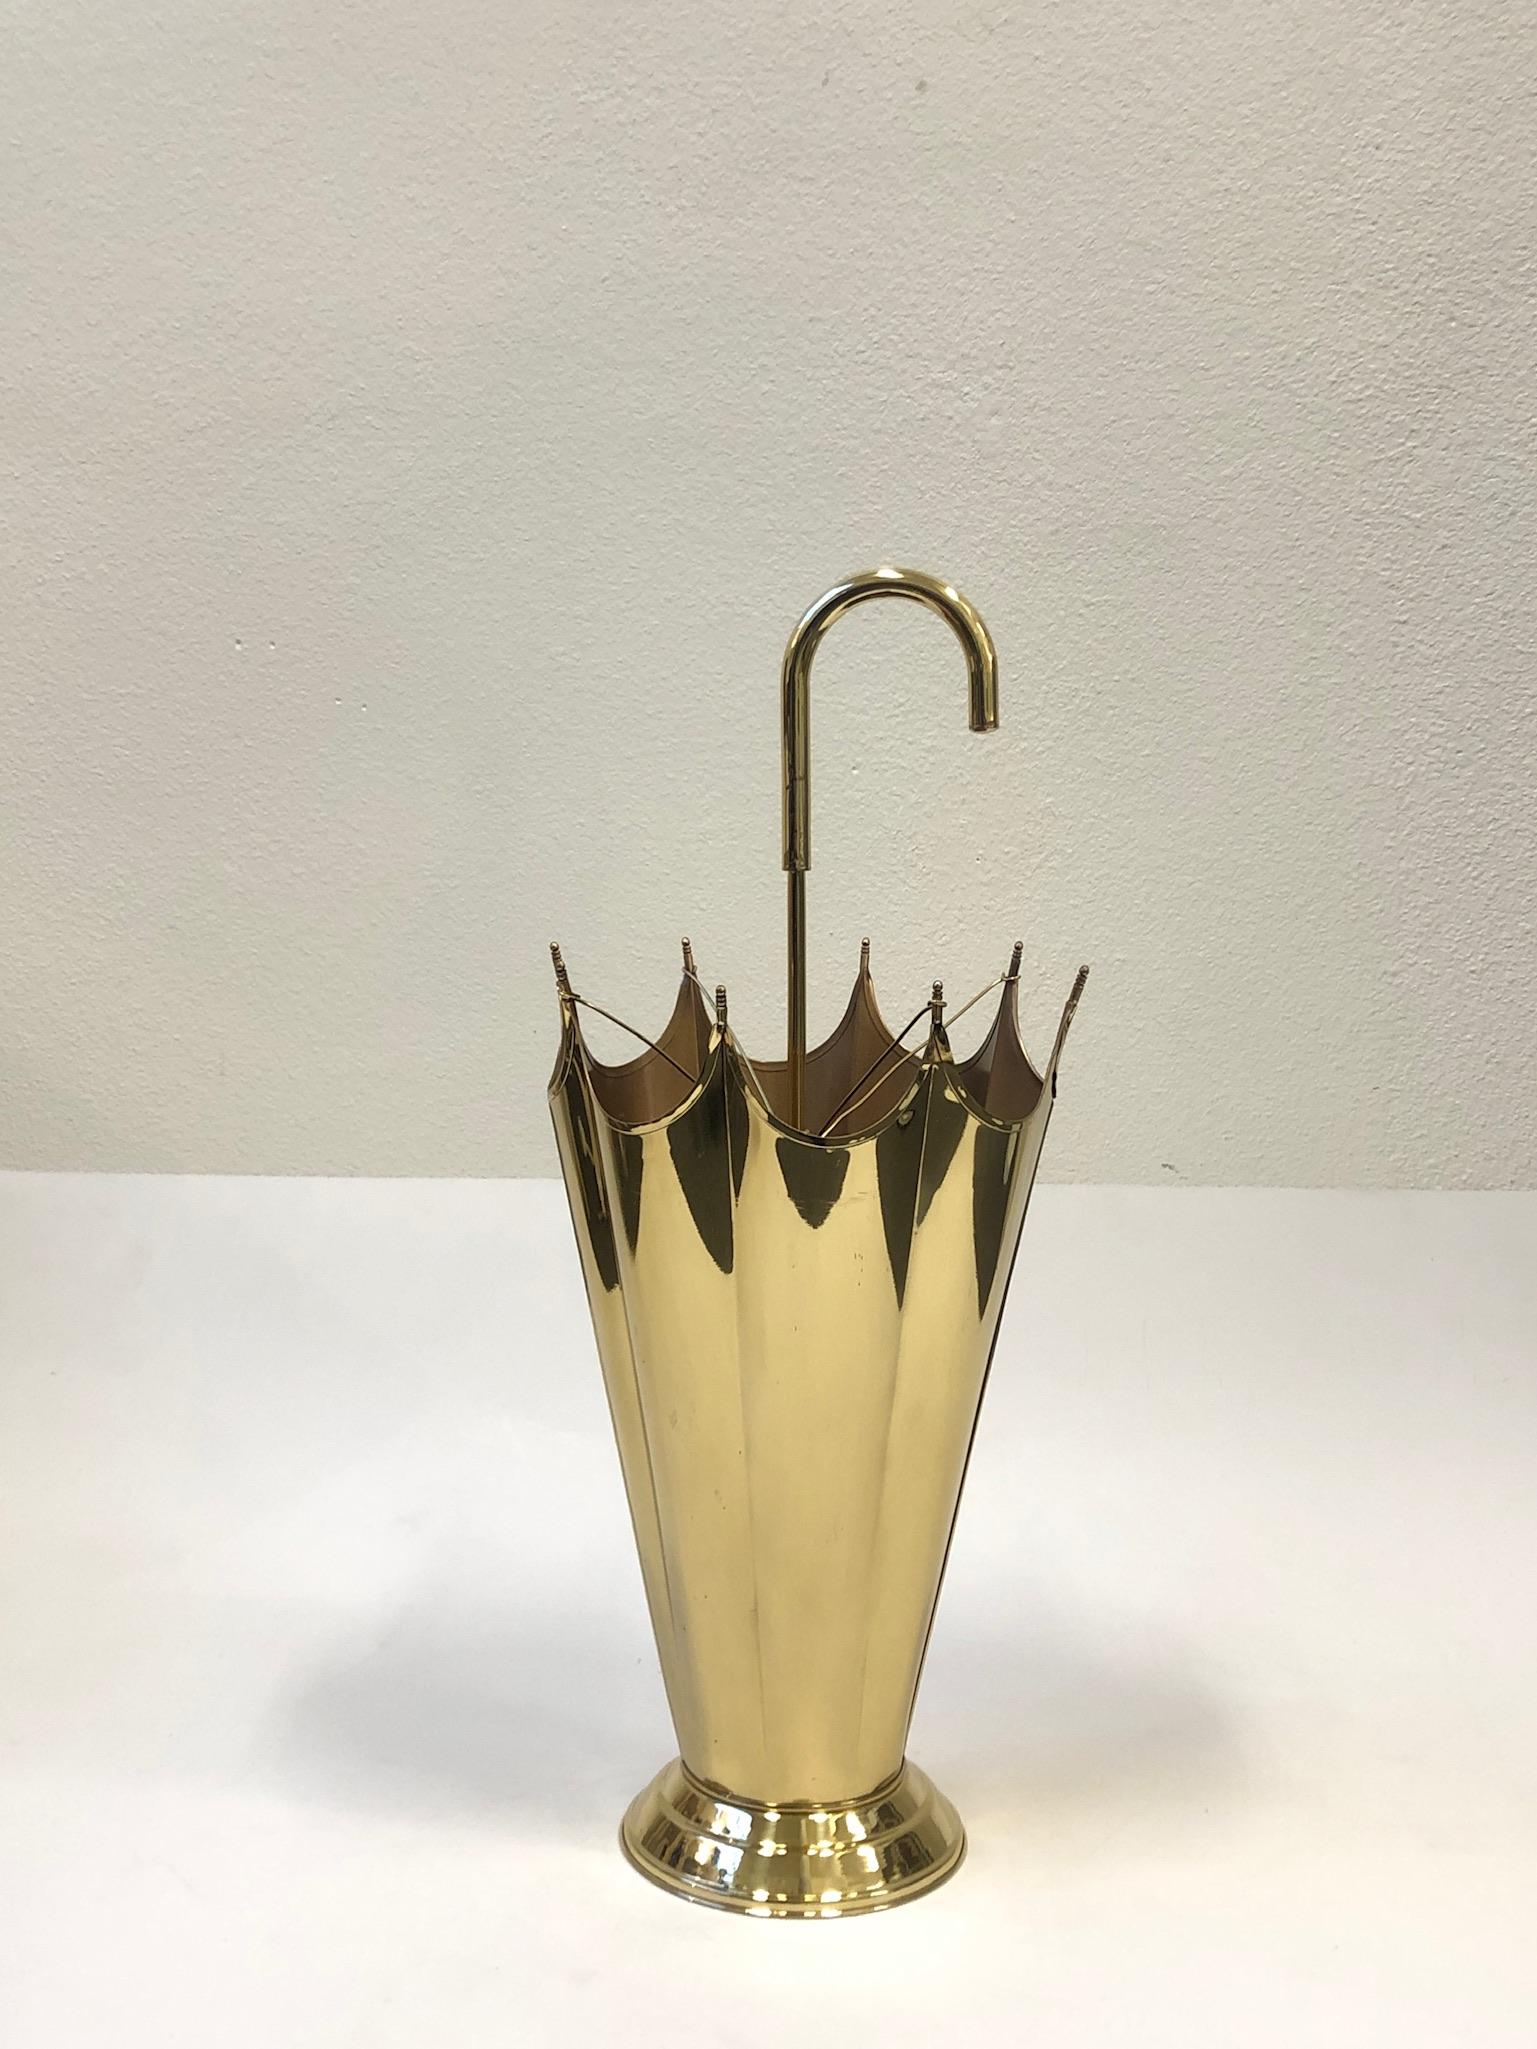 Beautiful 1970s polish brass umbrella holder in the shape of an umbrella. The holder has been newly professionally polish. Shows minor wear consistent with age. 
Dimensions: 11” diameter 26.5” high.